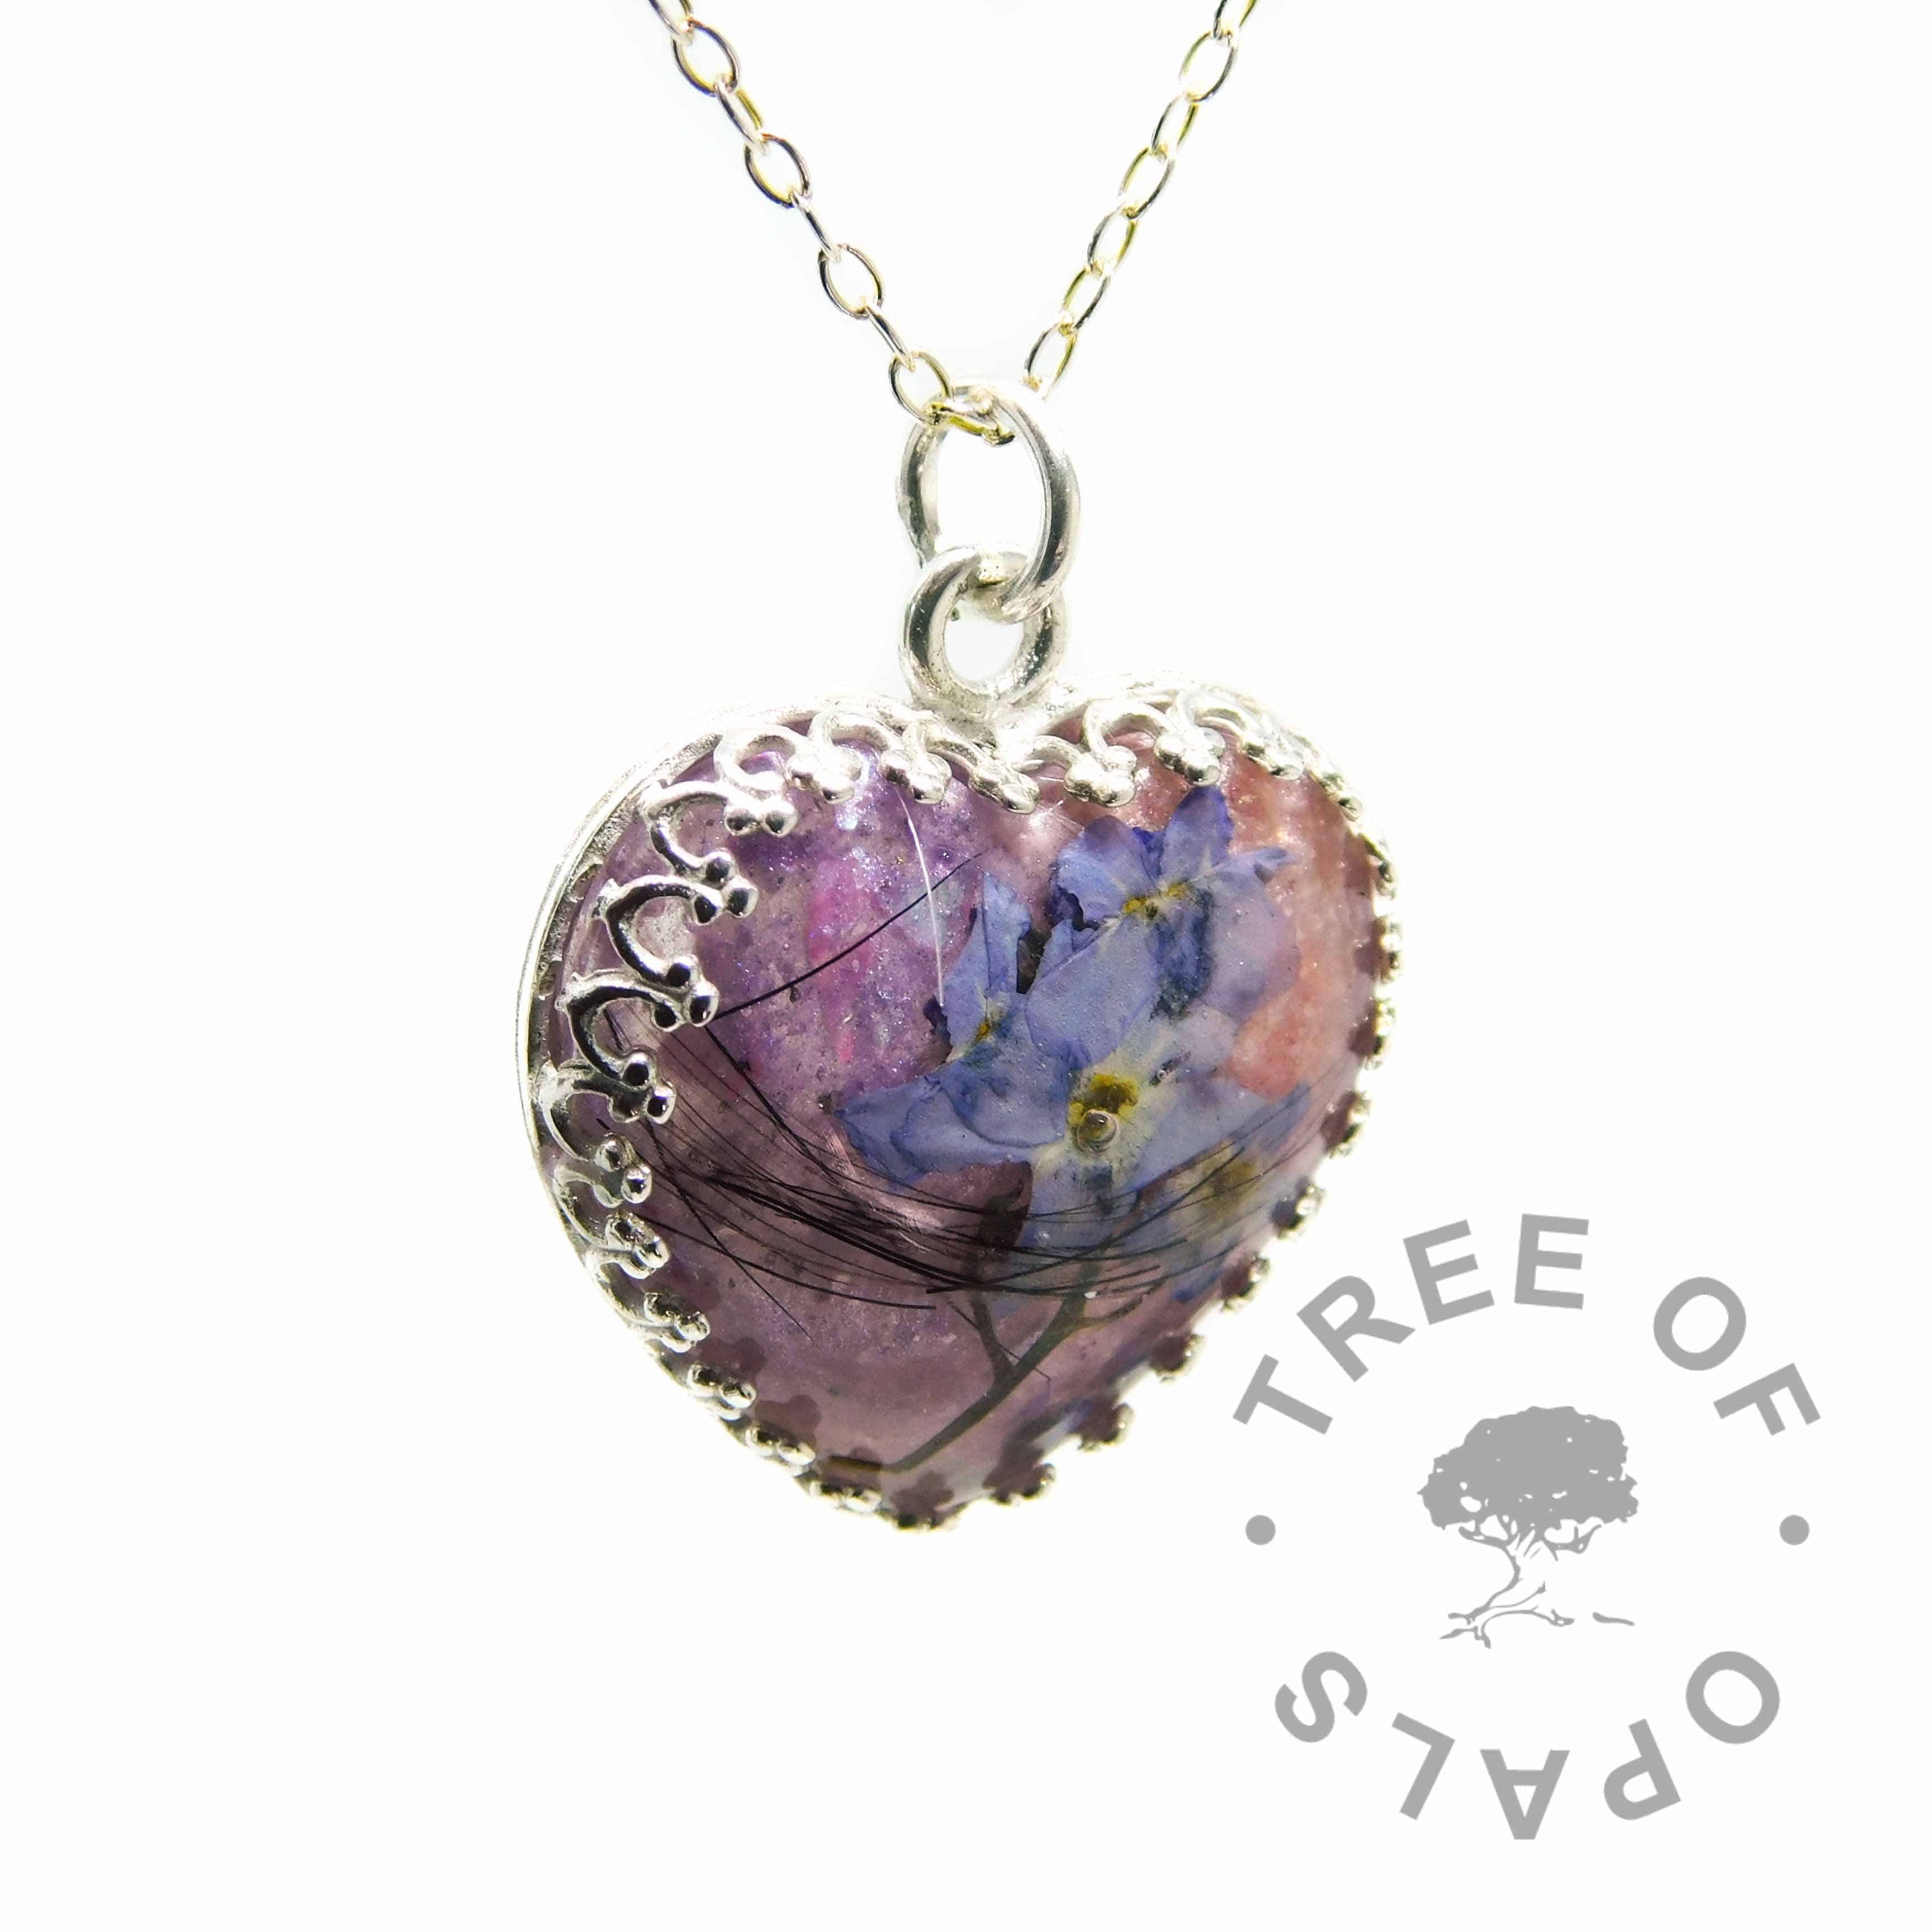 lock of hair heart necklace forget me not, pink and purple resin and crown setting. Handmade solid sterling silver memorial necklace by Tree of Opals